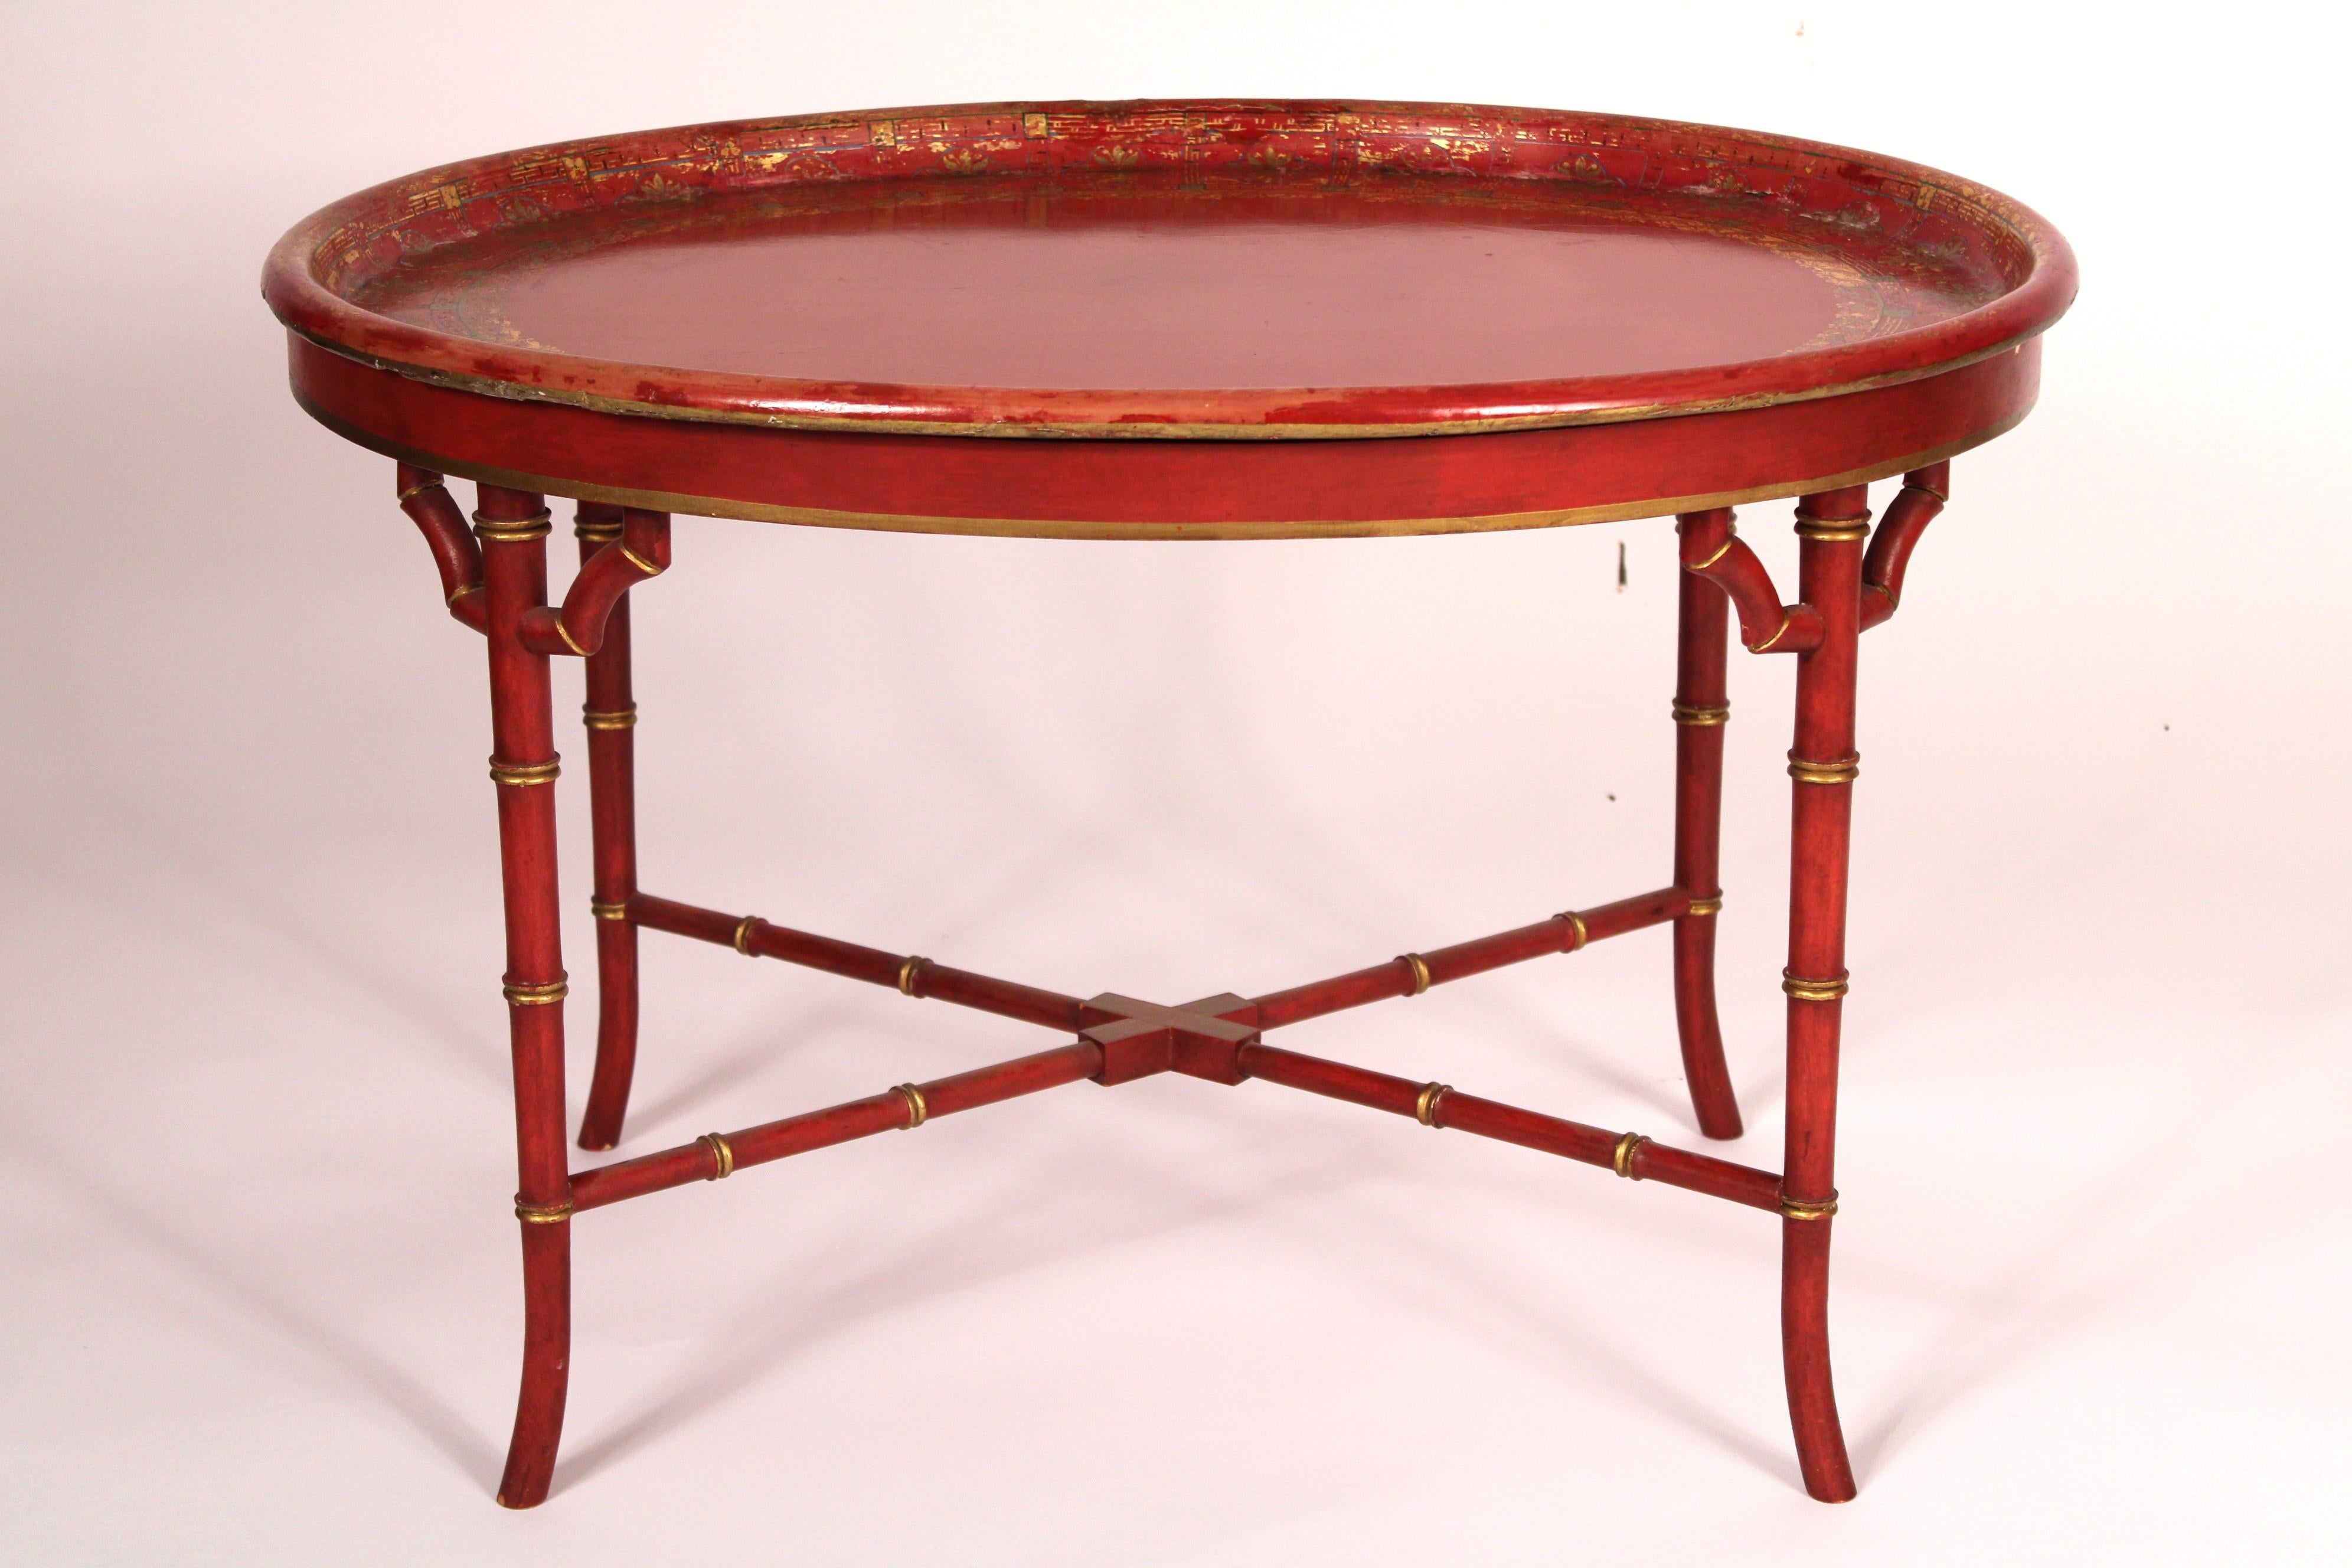 English oval paper mache, red lacquer and gilt decorated tray, late 19th century, on a red lacquer and gilt decorated bamboo style turned stand, circa late 20th century. With a Hedley's Humpers English shipping label on the back of the tray.